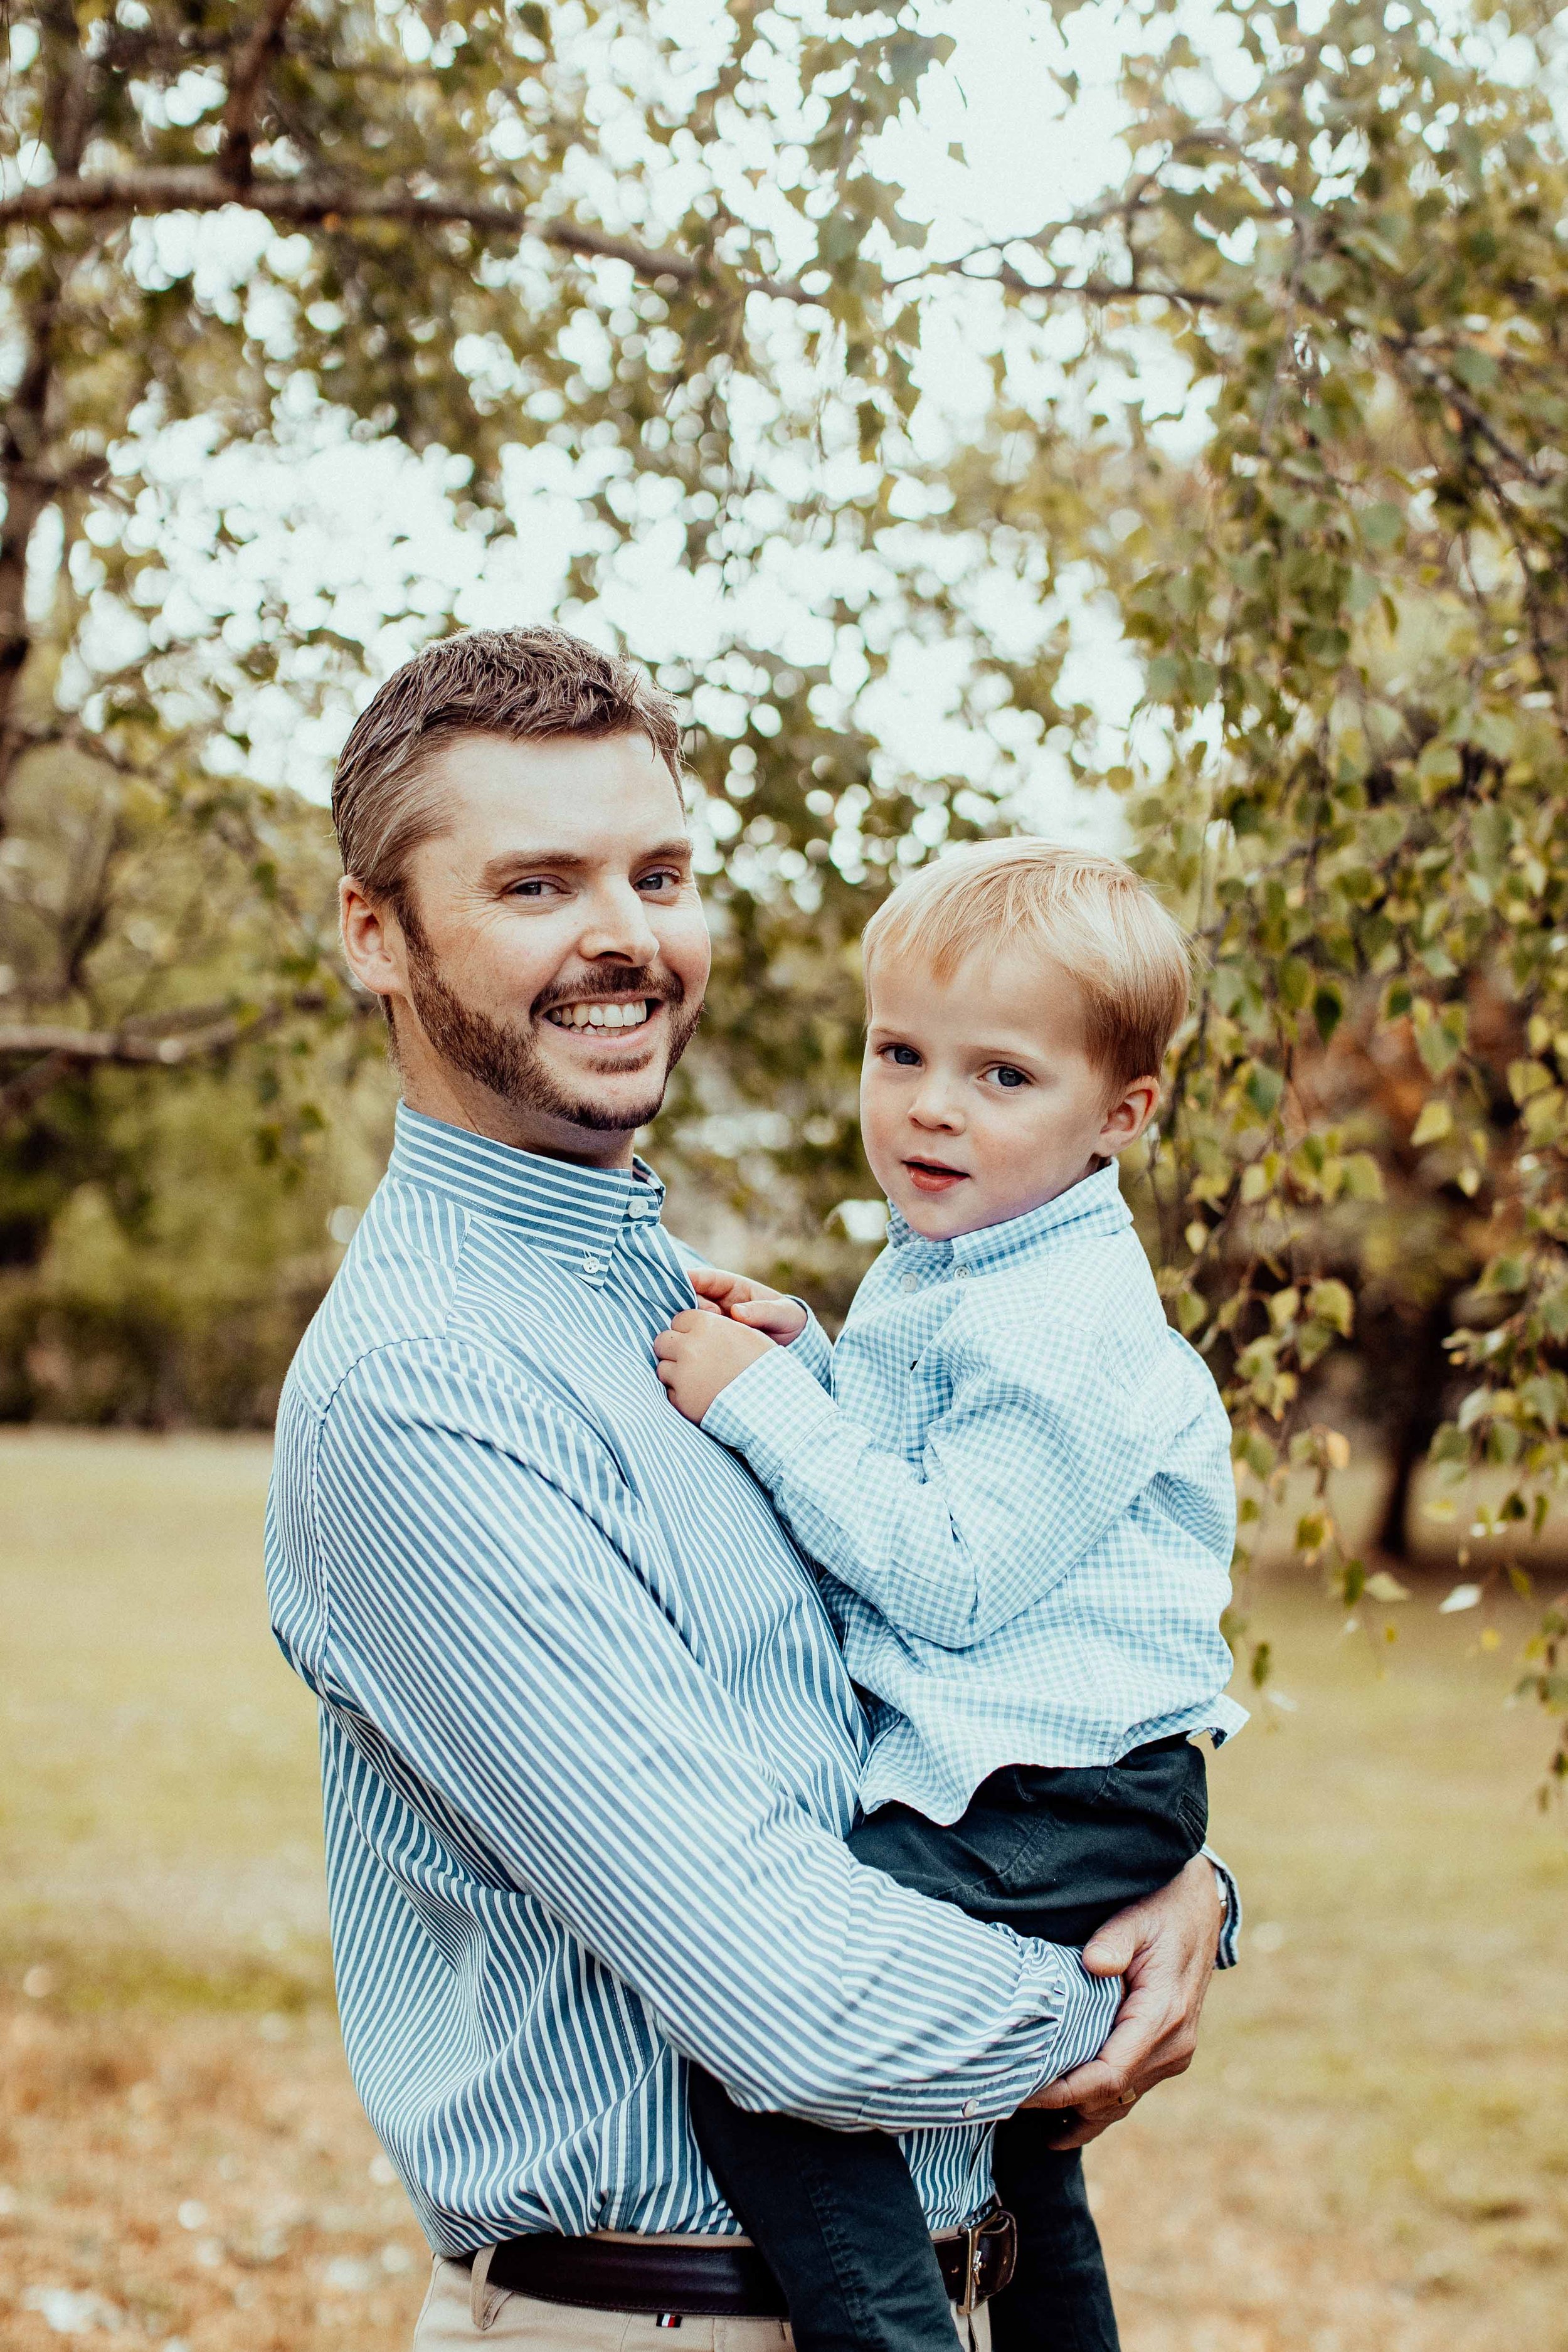 mittagong-bowral-southern-highlands-family-photography-www.emilyobrienphotography.net-lee-family-session-16.jpg